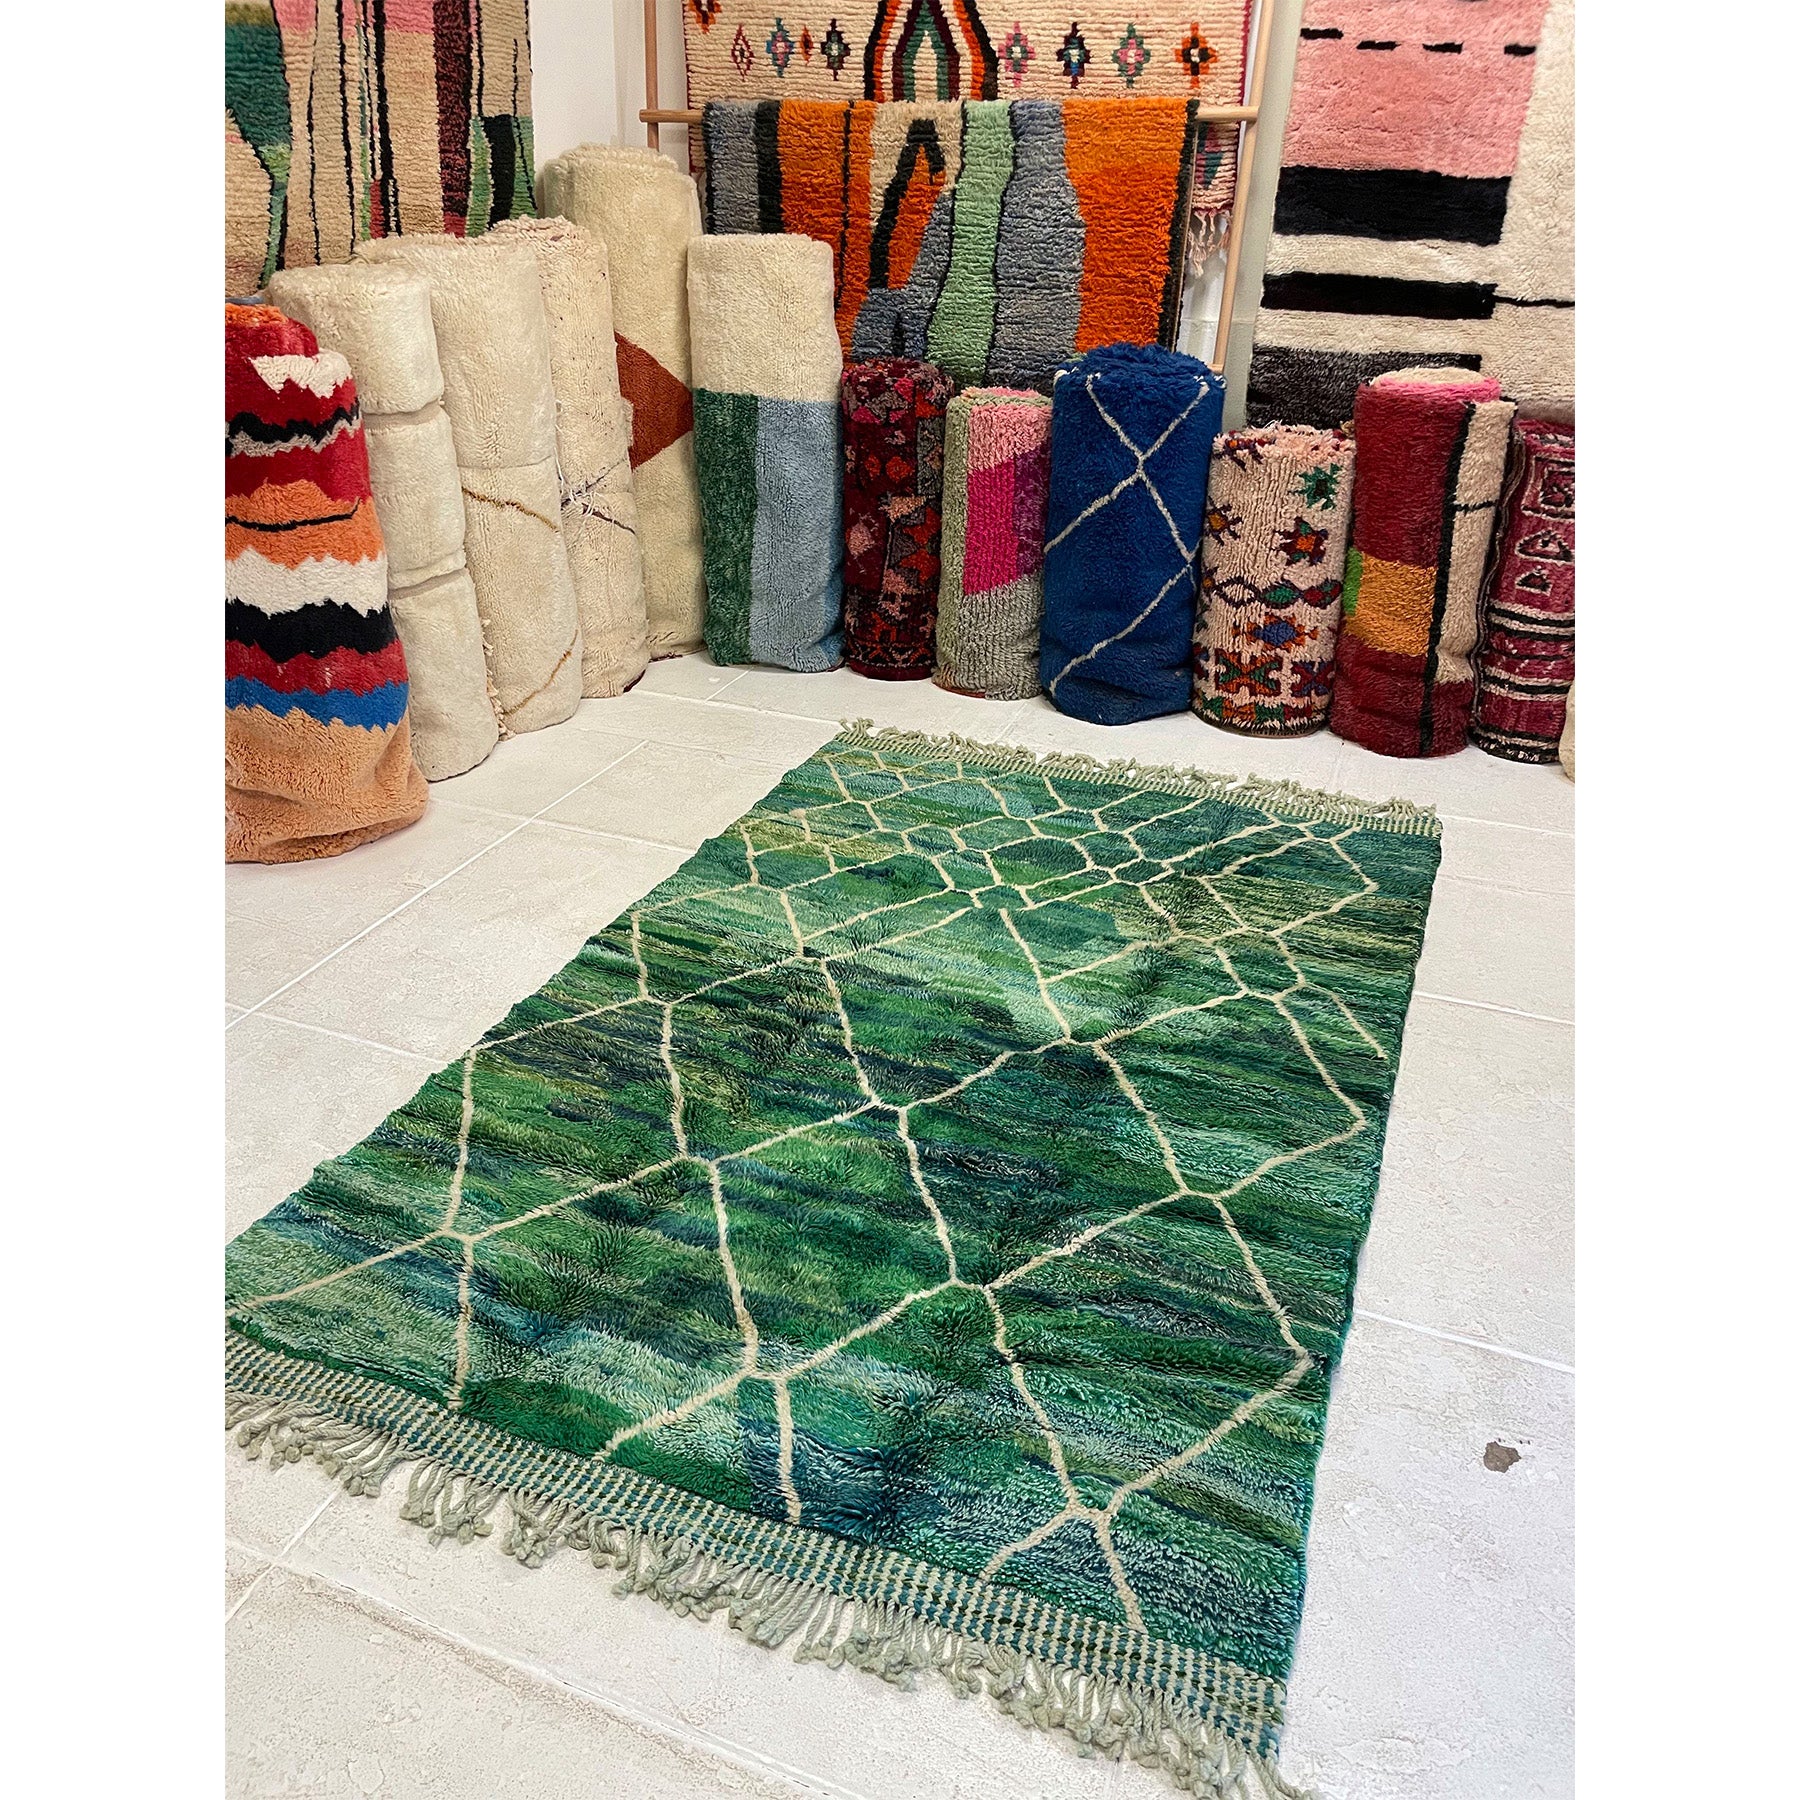 Green area sized Beni rug laid out on the floor in the Rug Shop with bundles of neutral oversized rugs in the background | Kantara Moroccan Rugs in Los Angeles at The Rug Shop